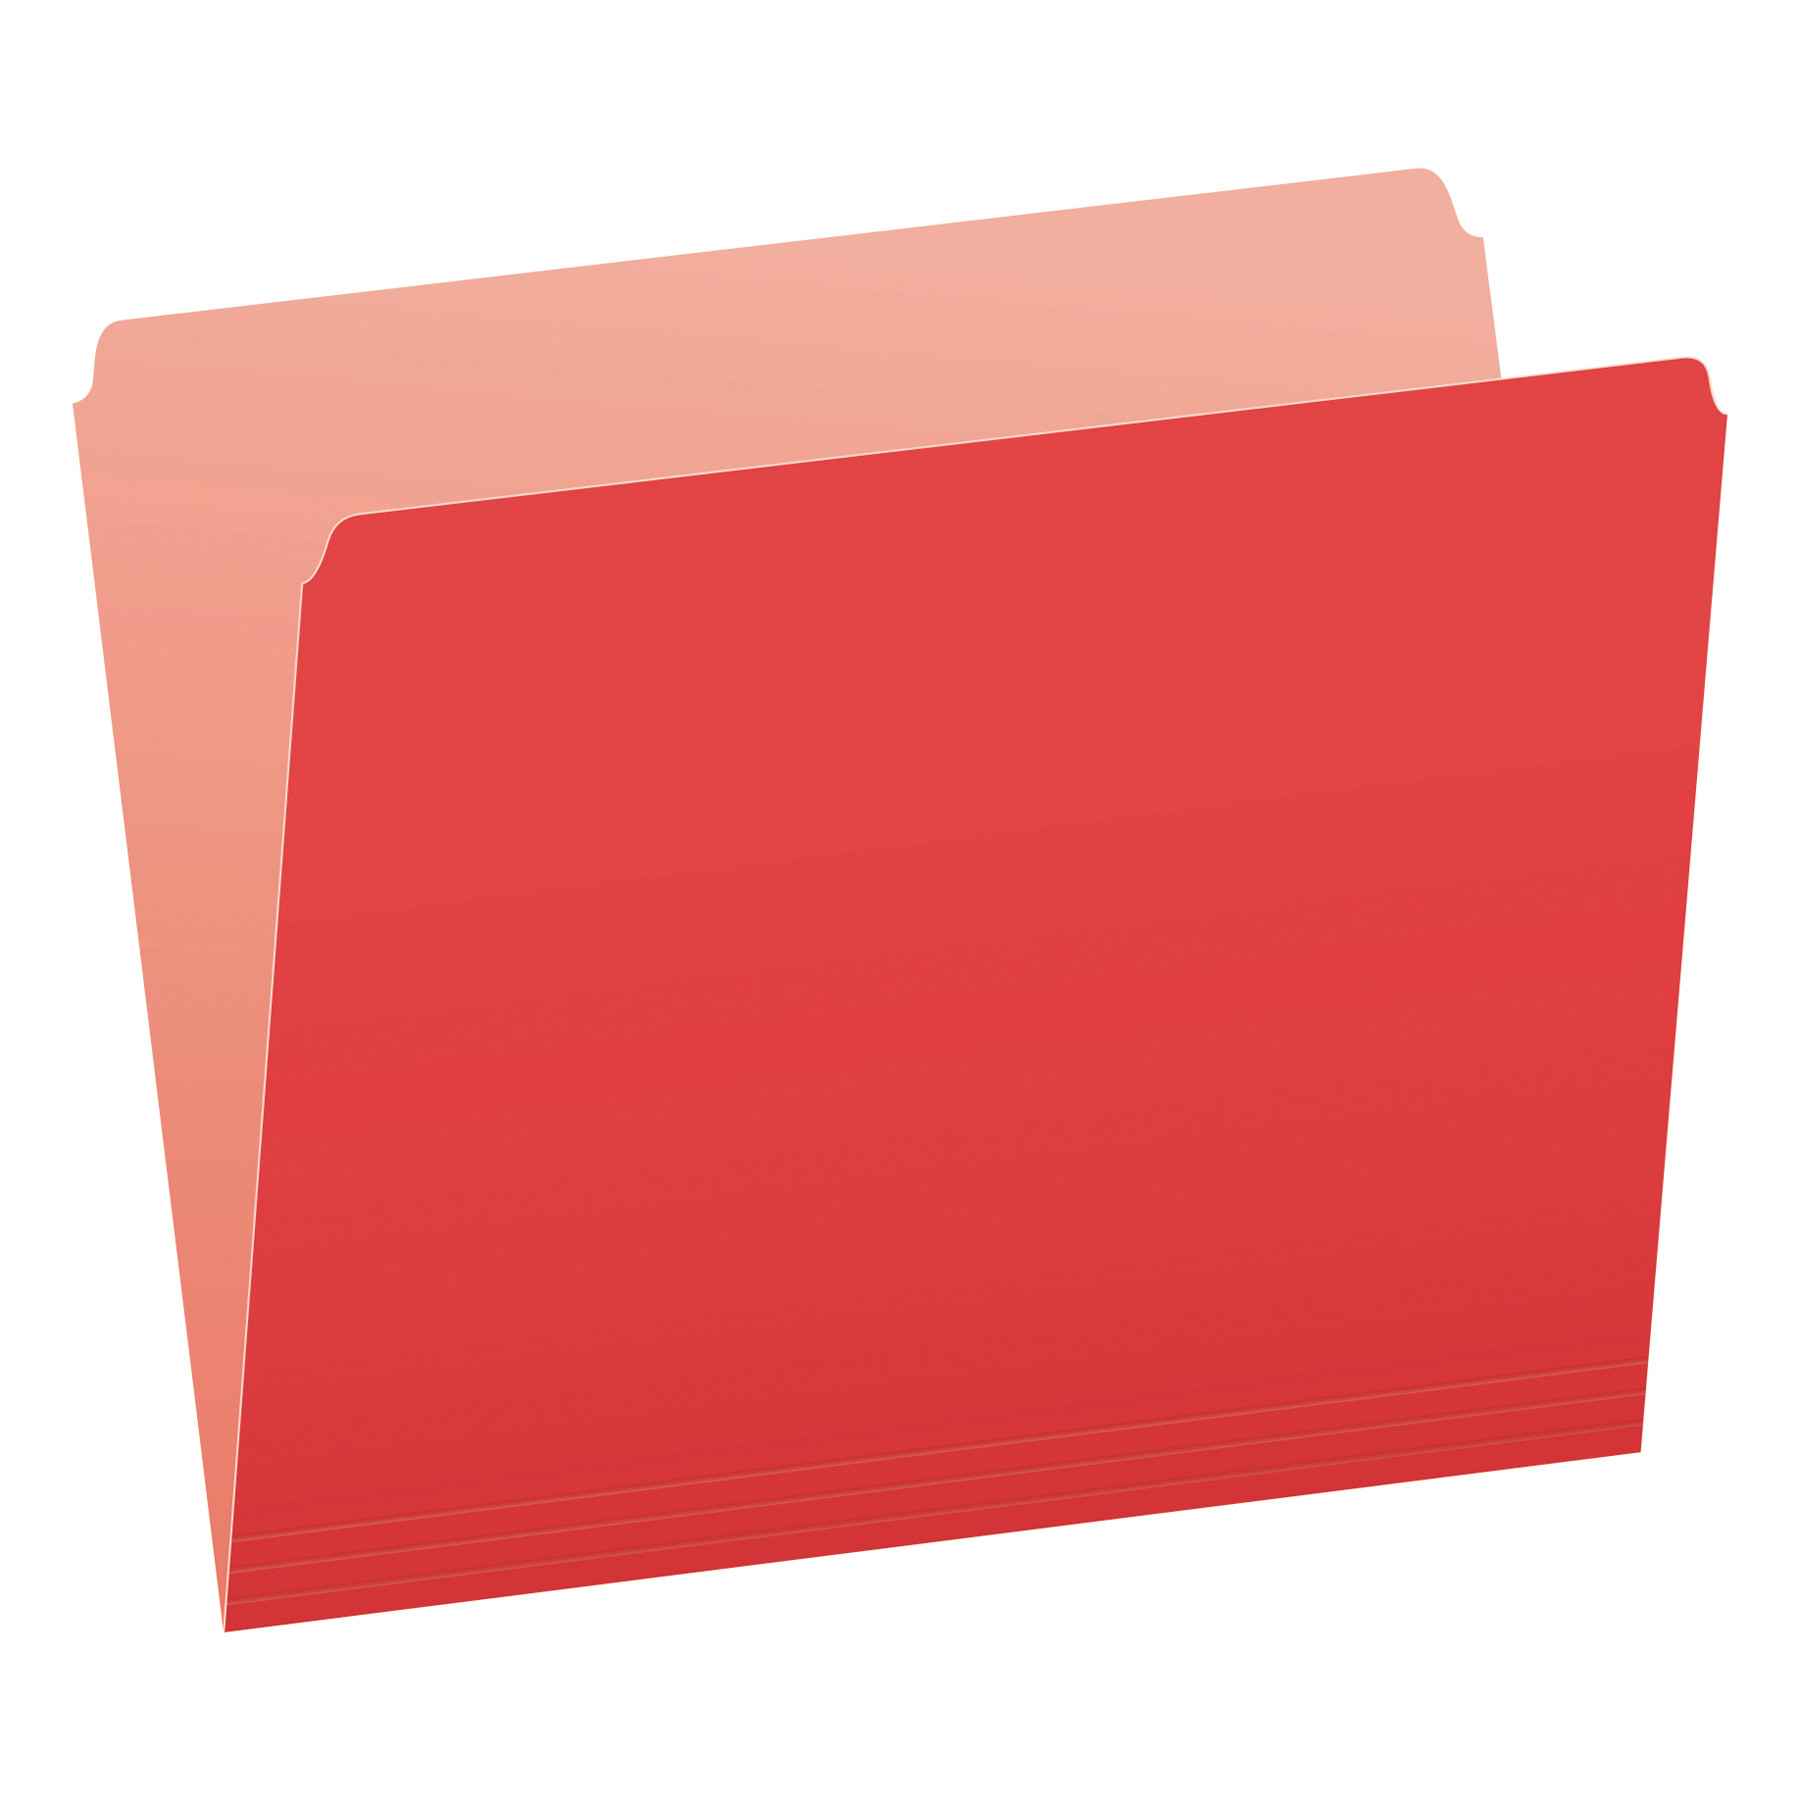  Pendaflex 152 RED Colored File Folders, Straight Tab, Letter Size, Red/Light Red, 100/Box (PFX152RED) 